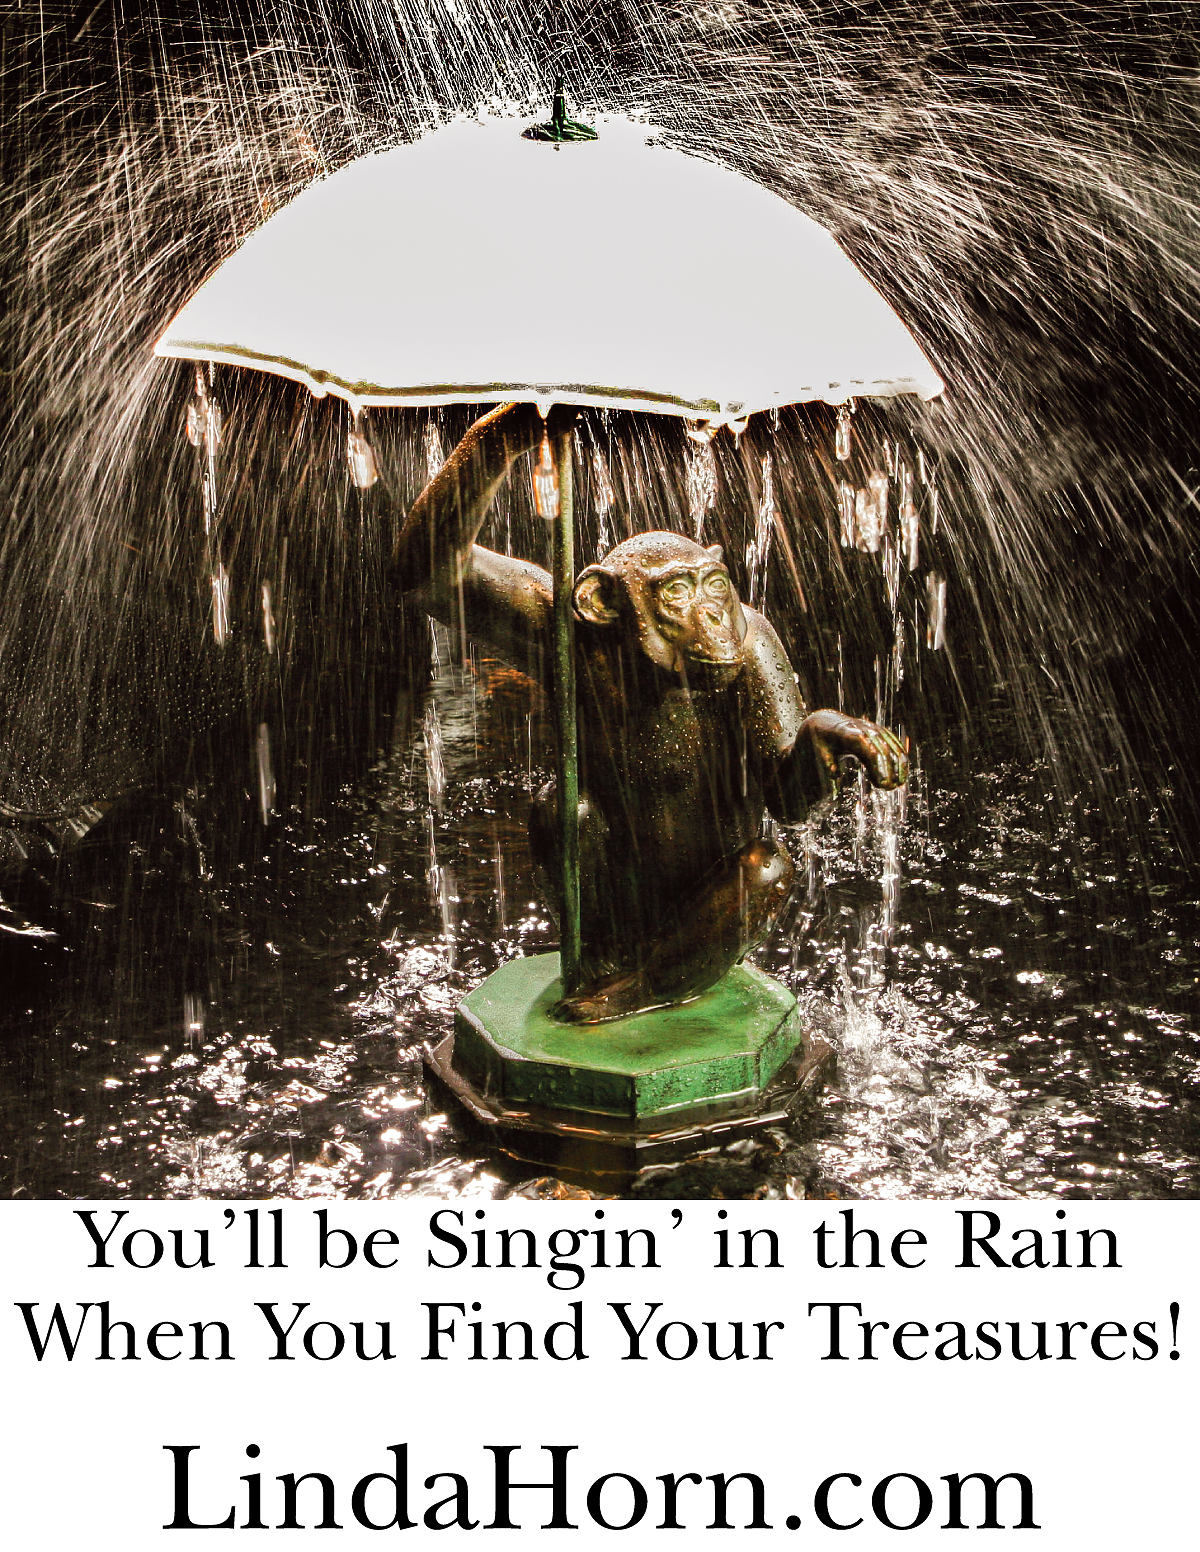 You'll be Singin' in the Rain When You Find Your Treasures!